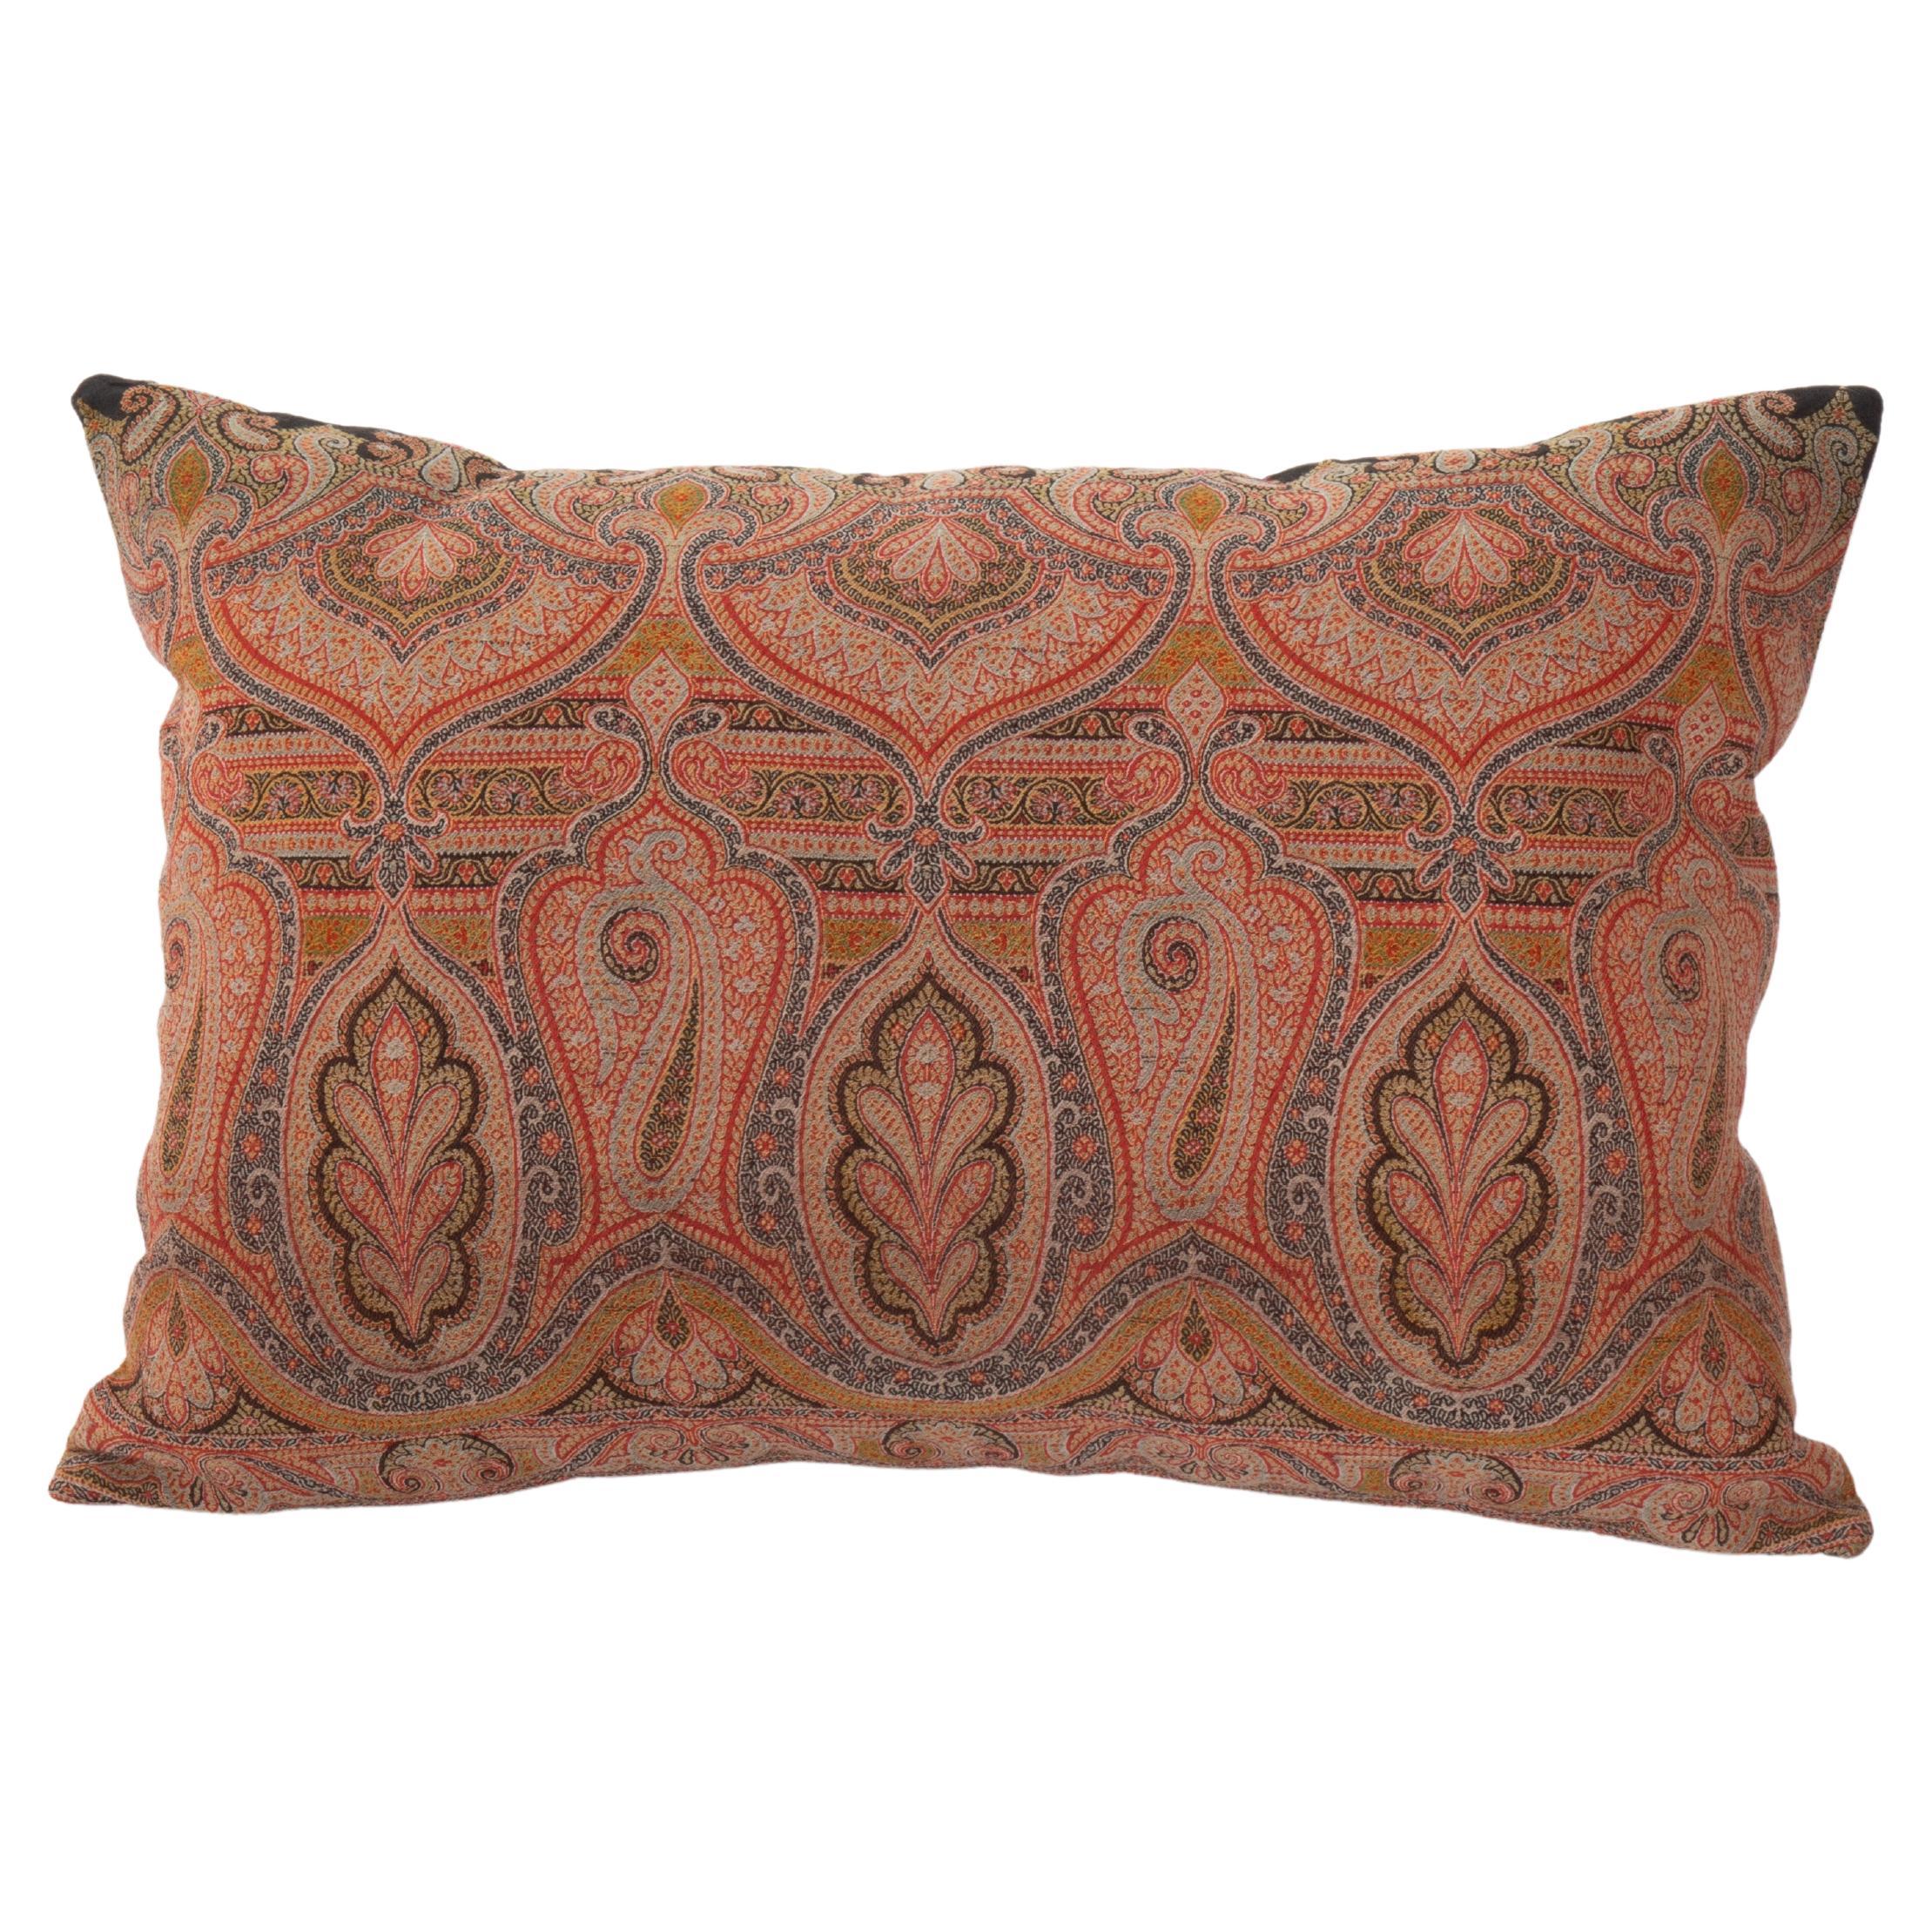 Antique Pillow Cover Made from a European Wool Paisley Shawl, L 19th/ E.20th